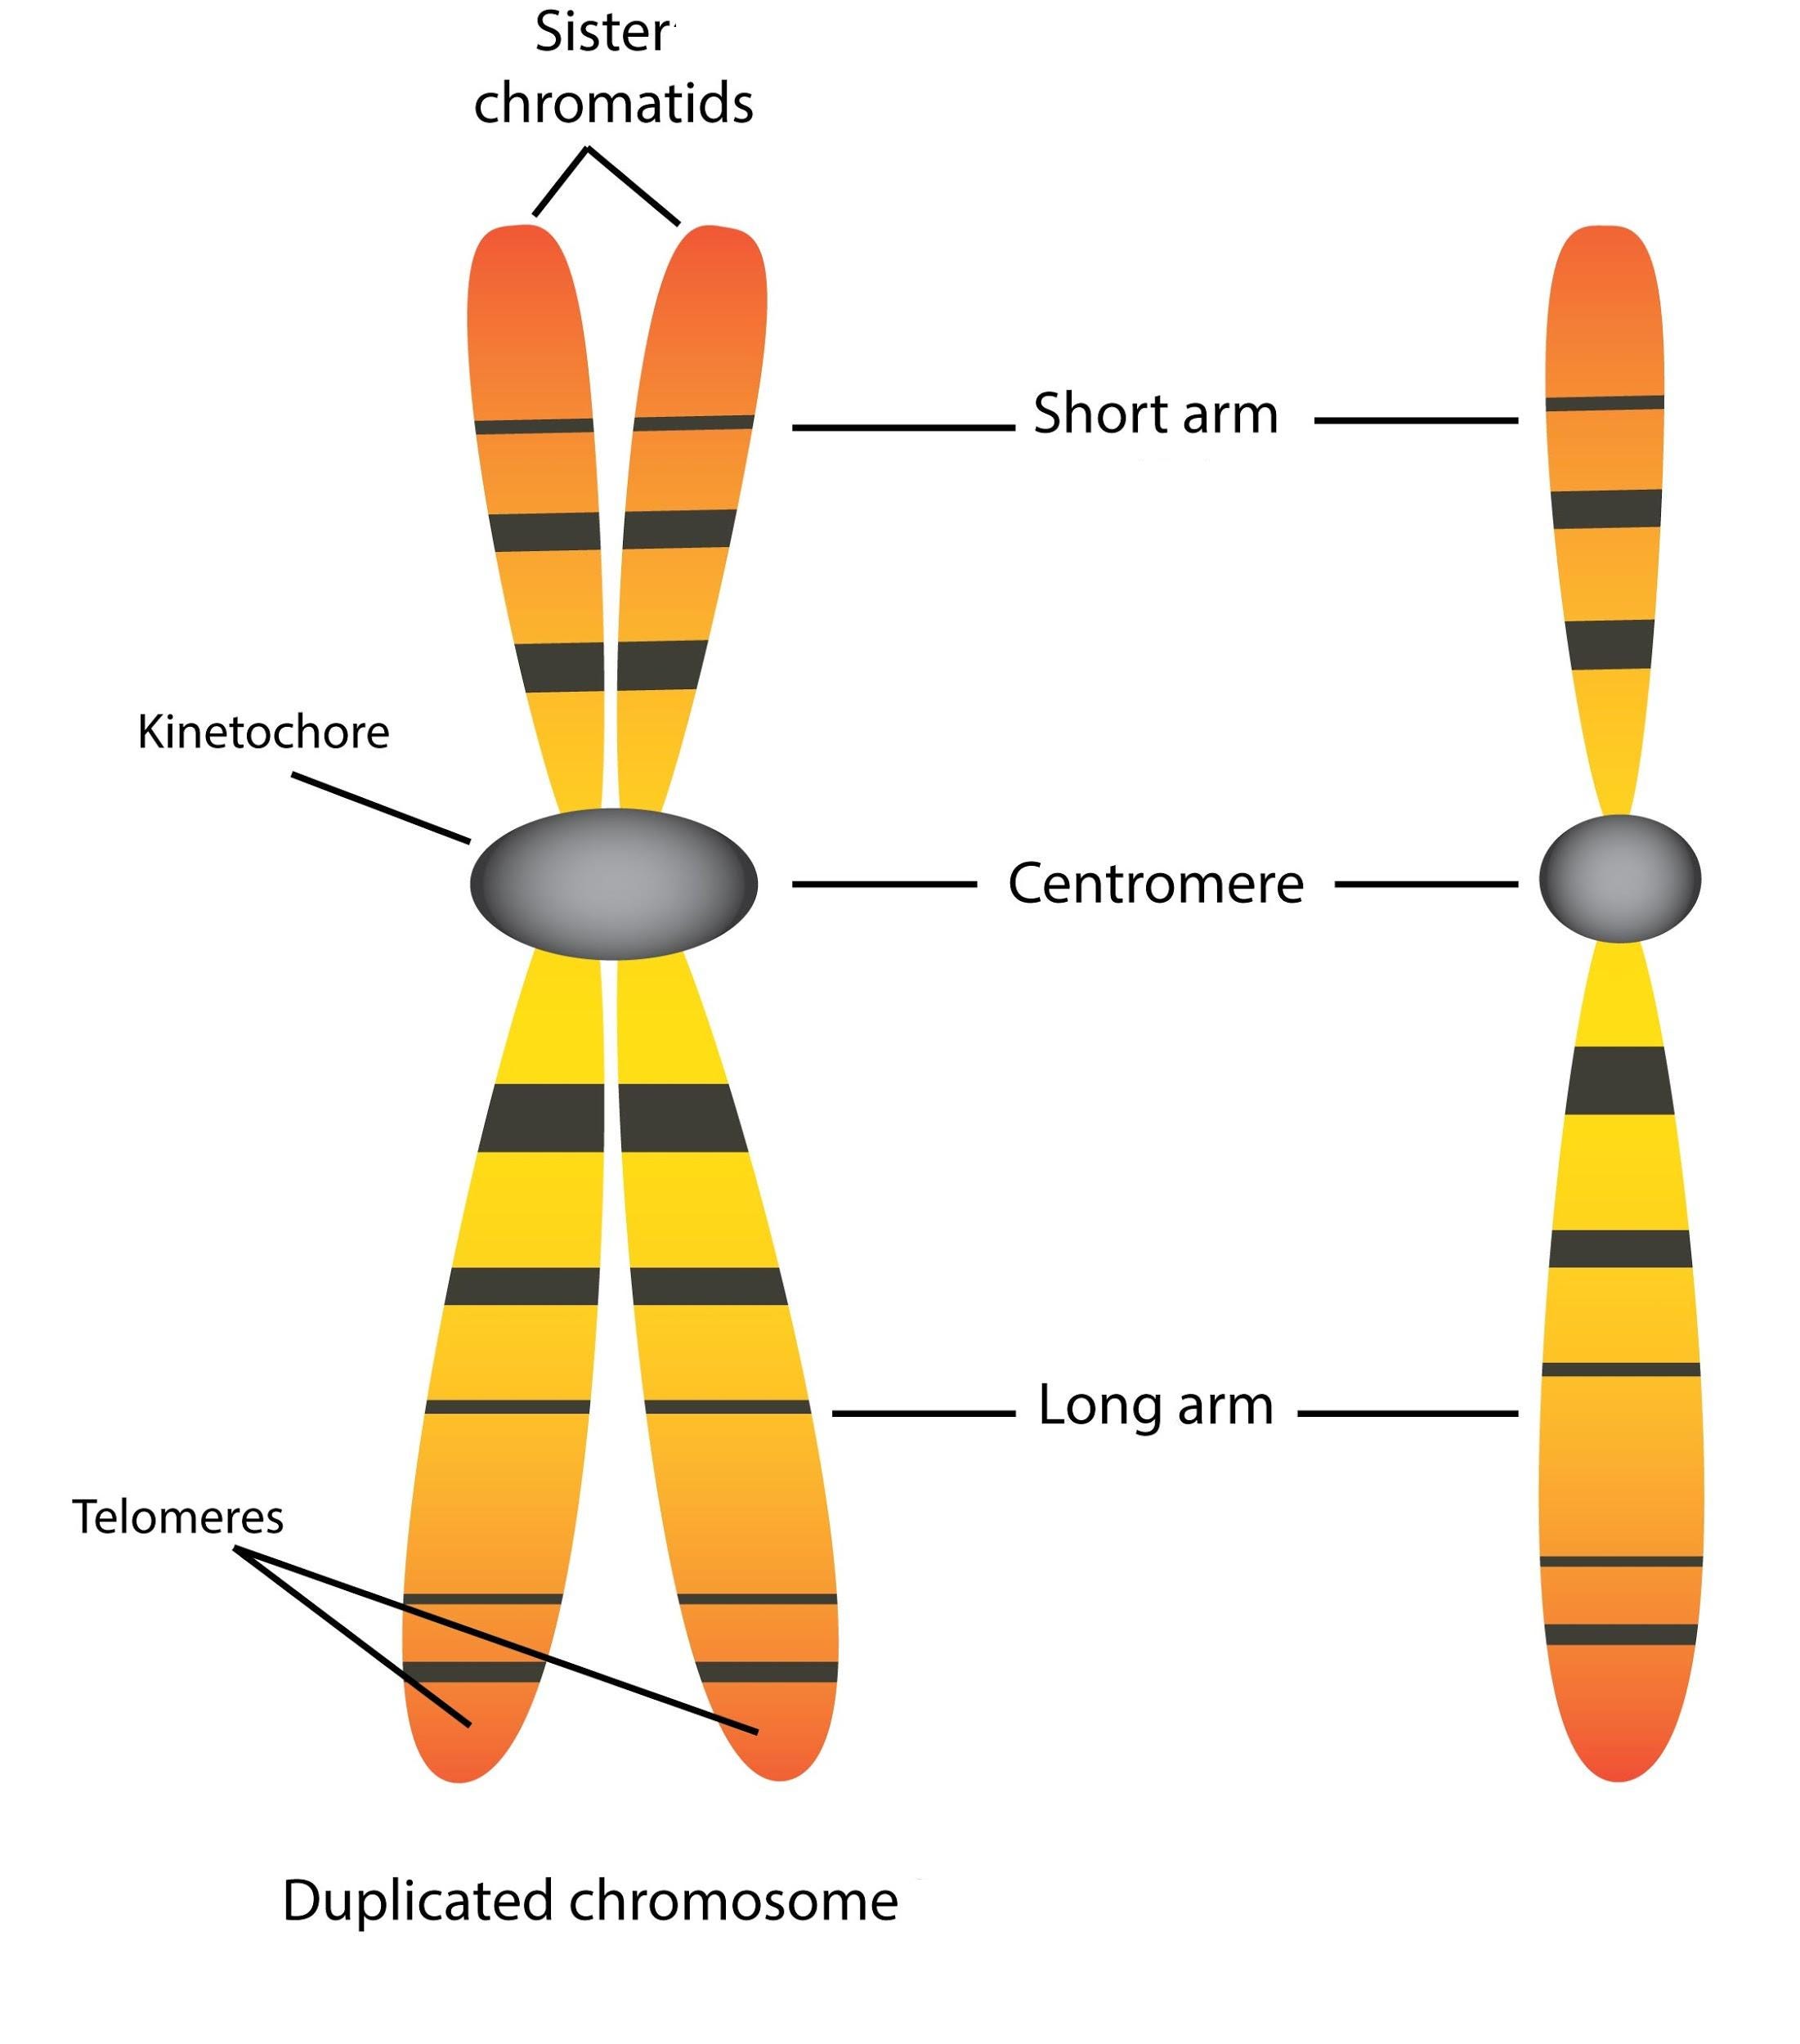 An X-shaped chromosome on the left and a single chromosome on the right.